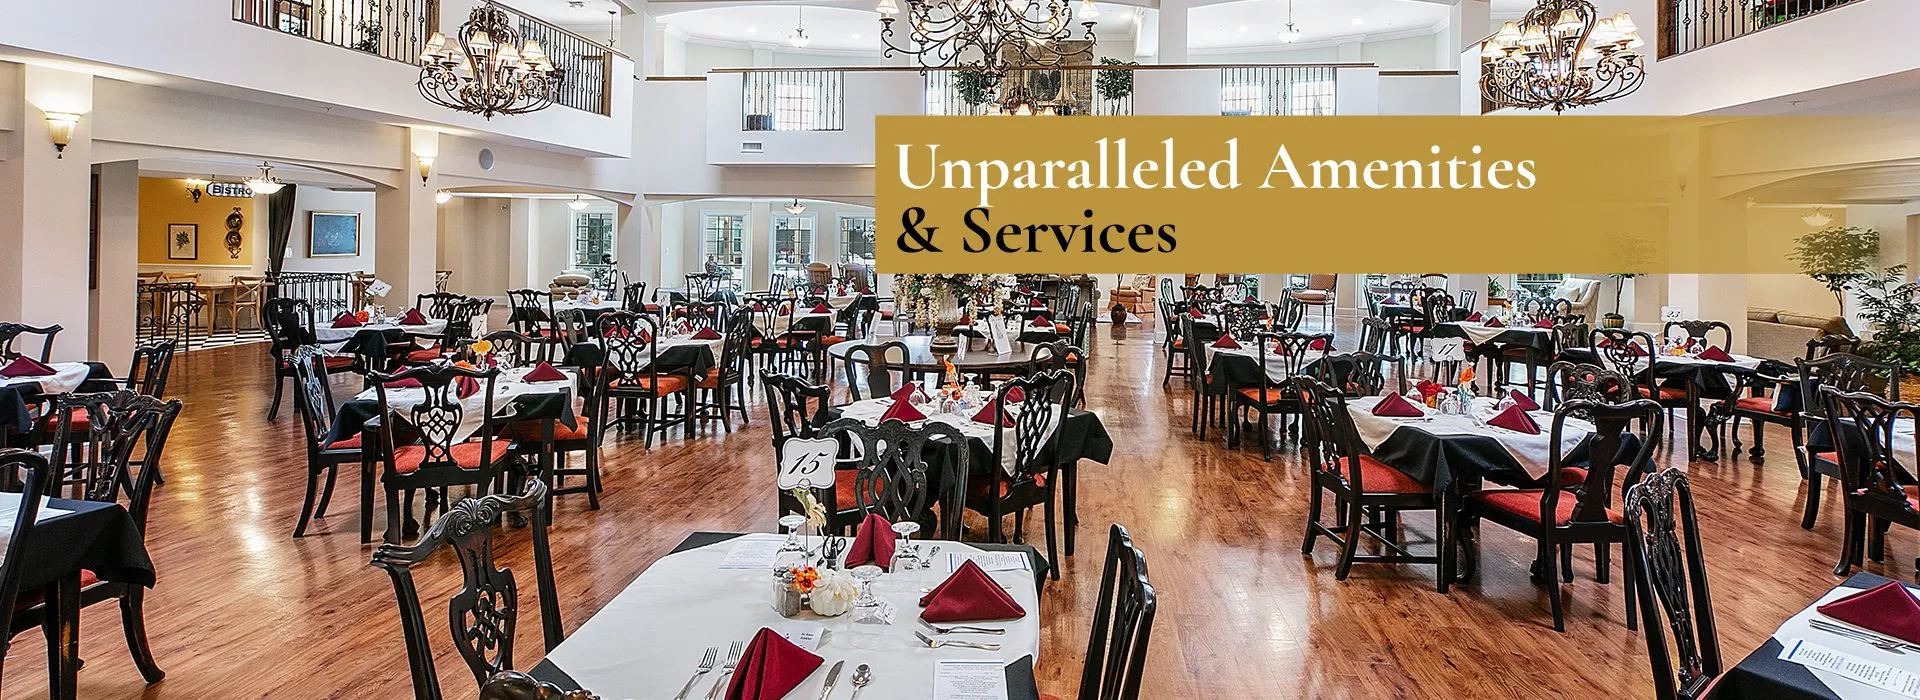 Unparalleled Amenities & Services